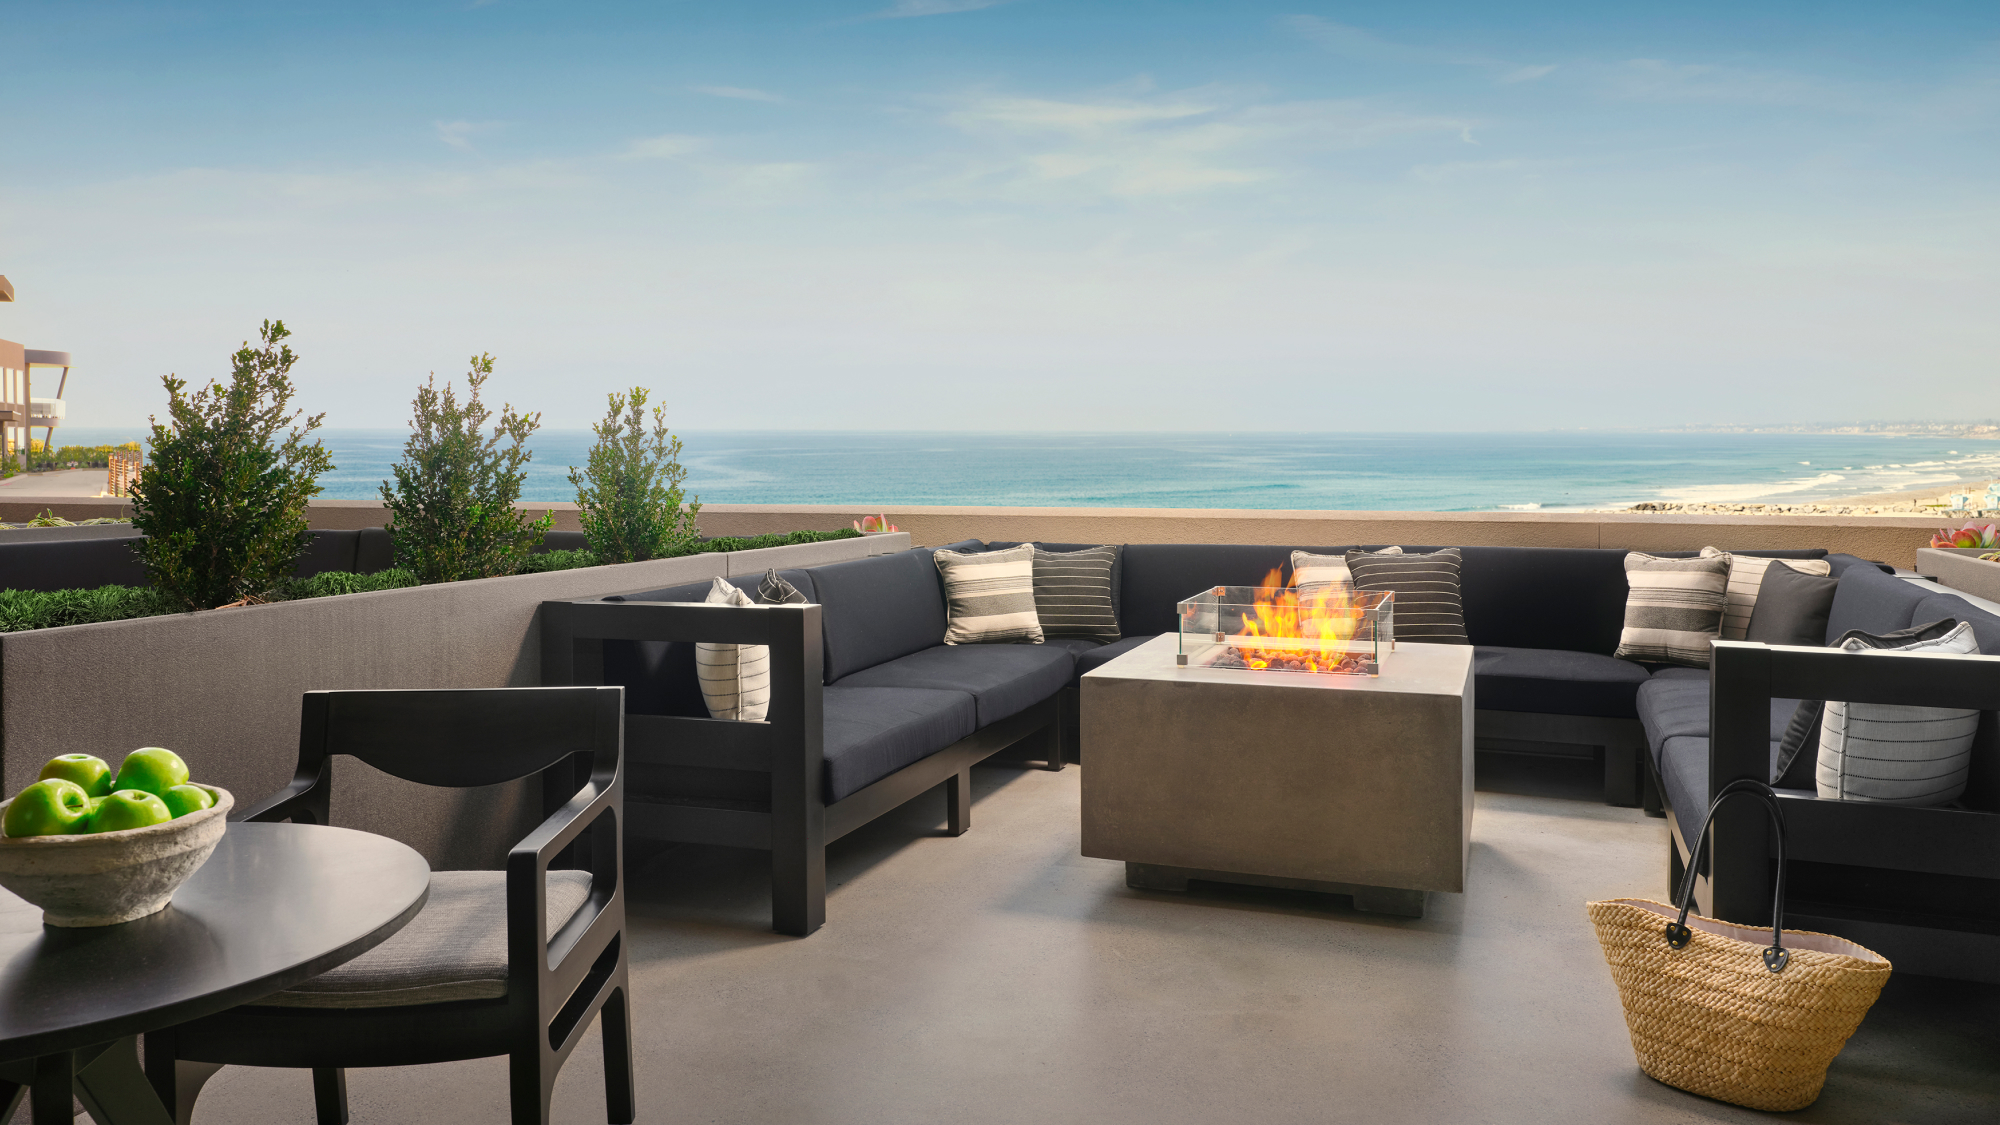 view of fire pit on balcony looking out onto ocean